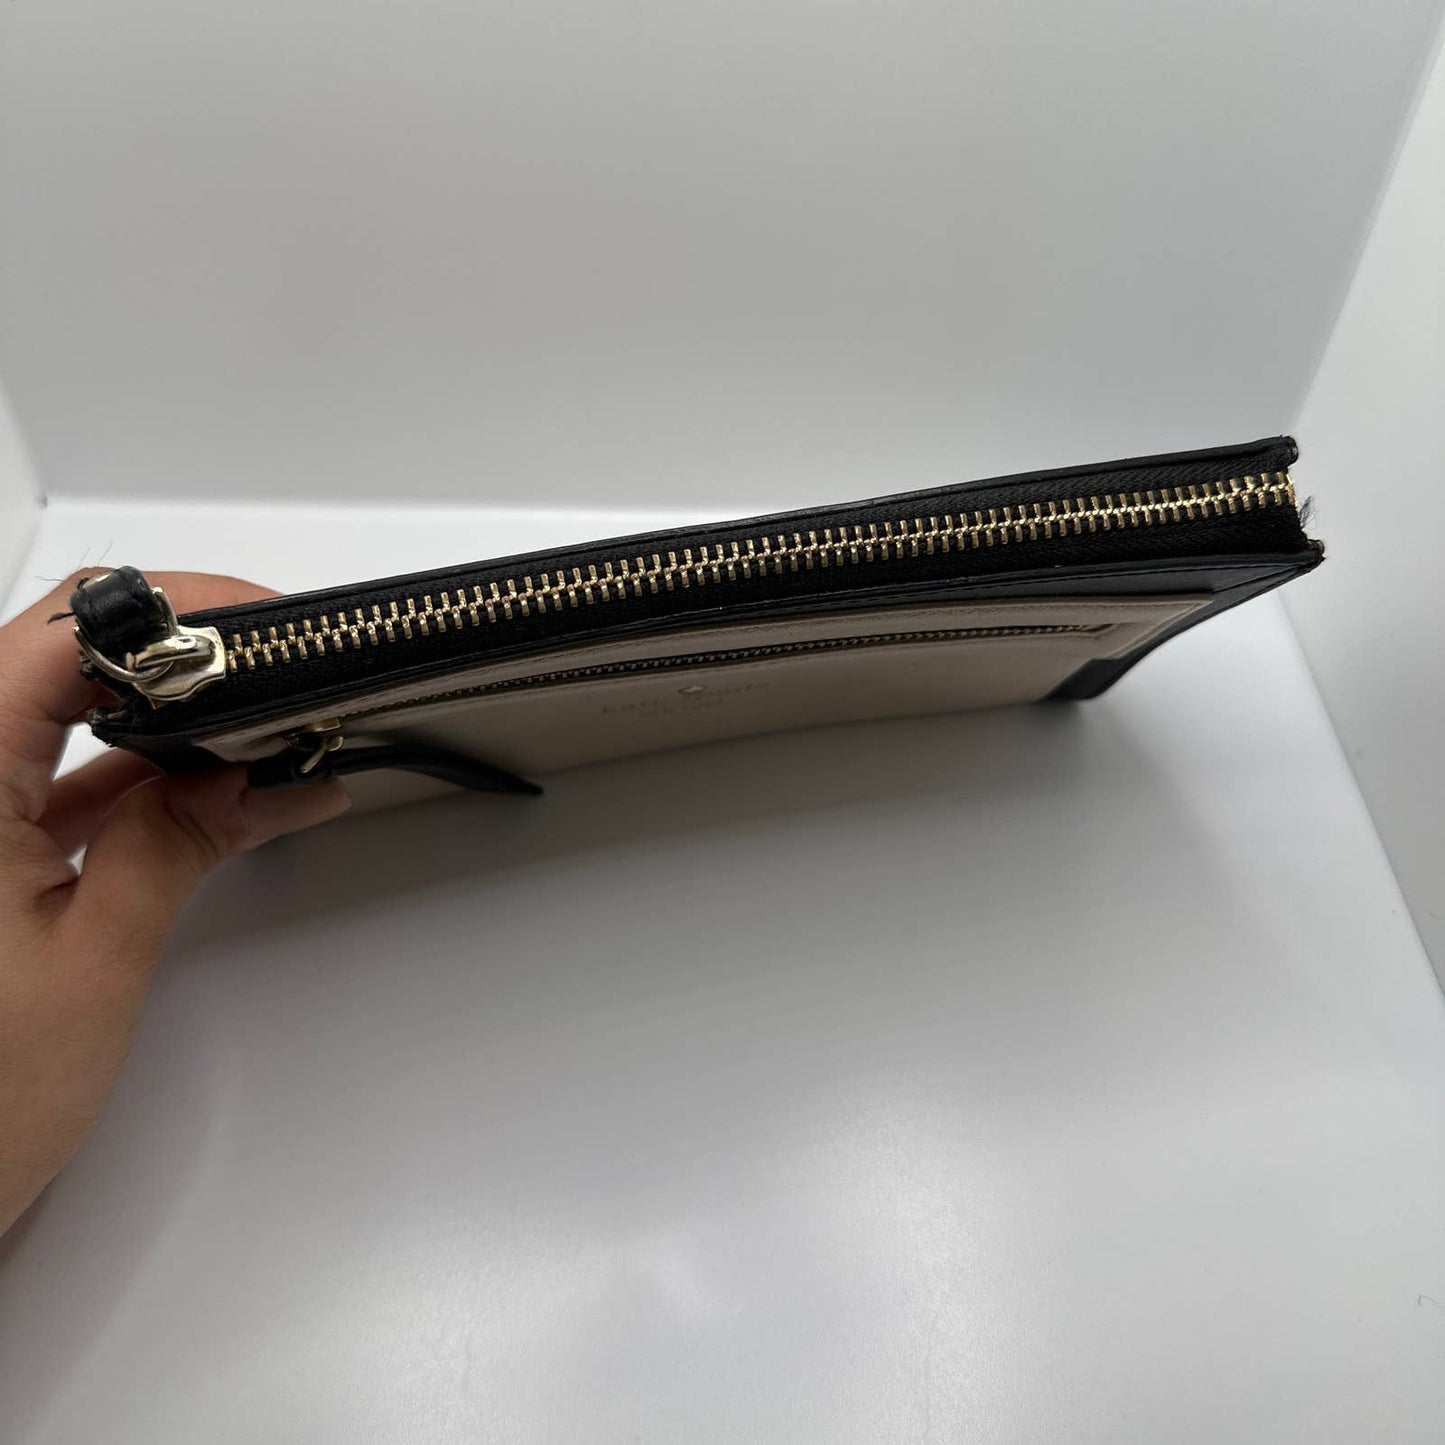 KATE SPADE New York Black and Cream / Taupe Wallet Wristlet